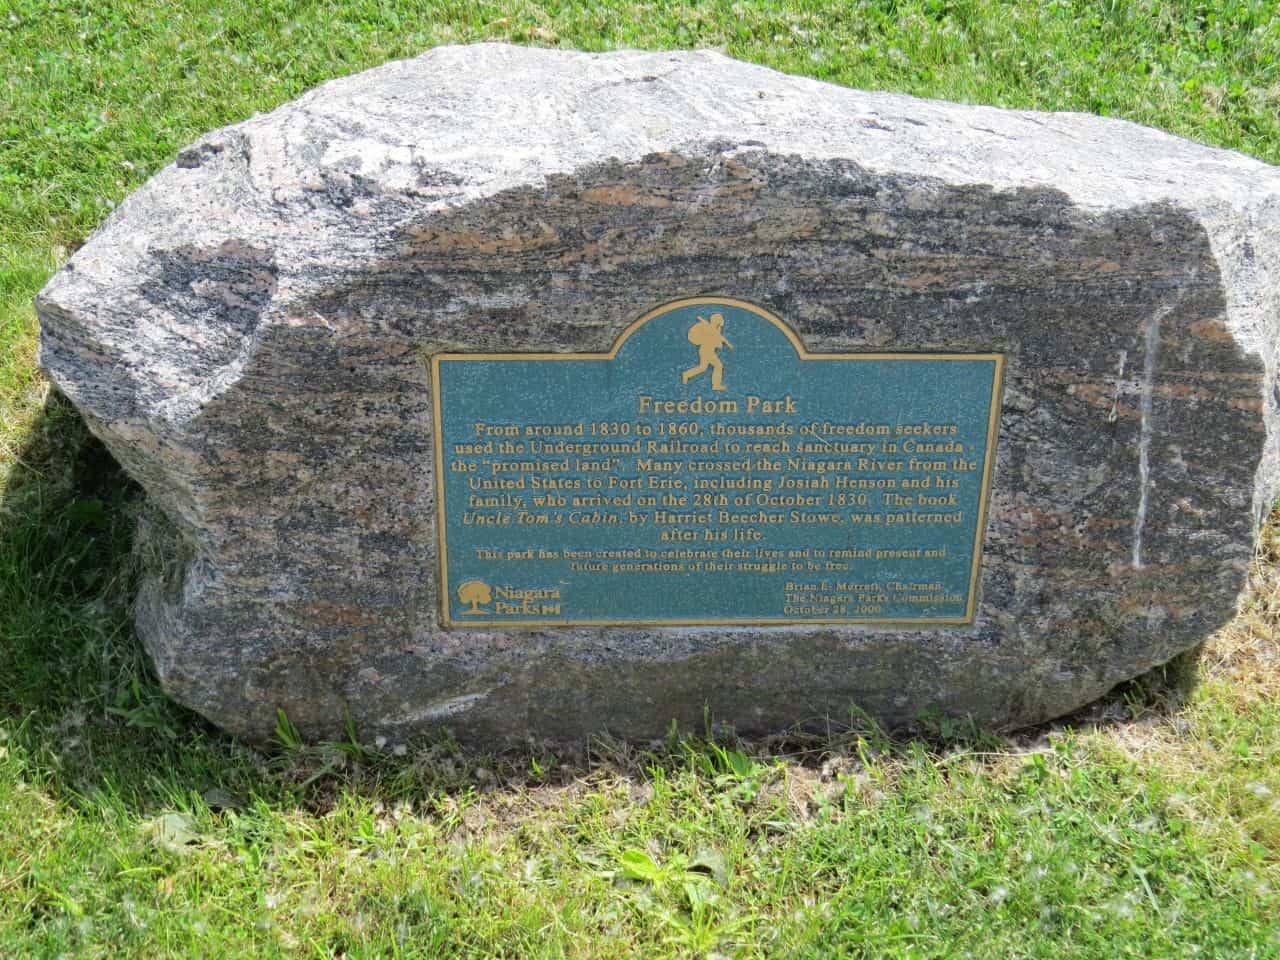 Plaques mark historically important locations for Black History on the Trans Canada Trail such as Freedom Park, Niagara